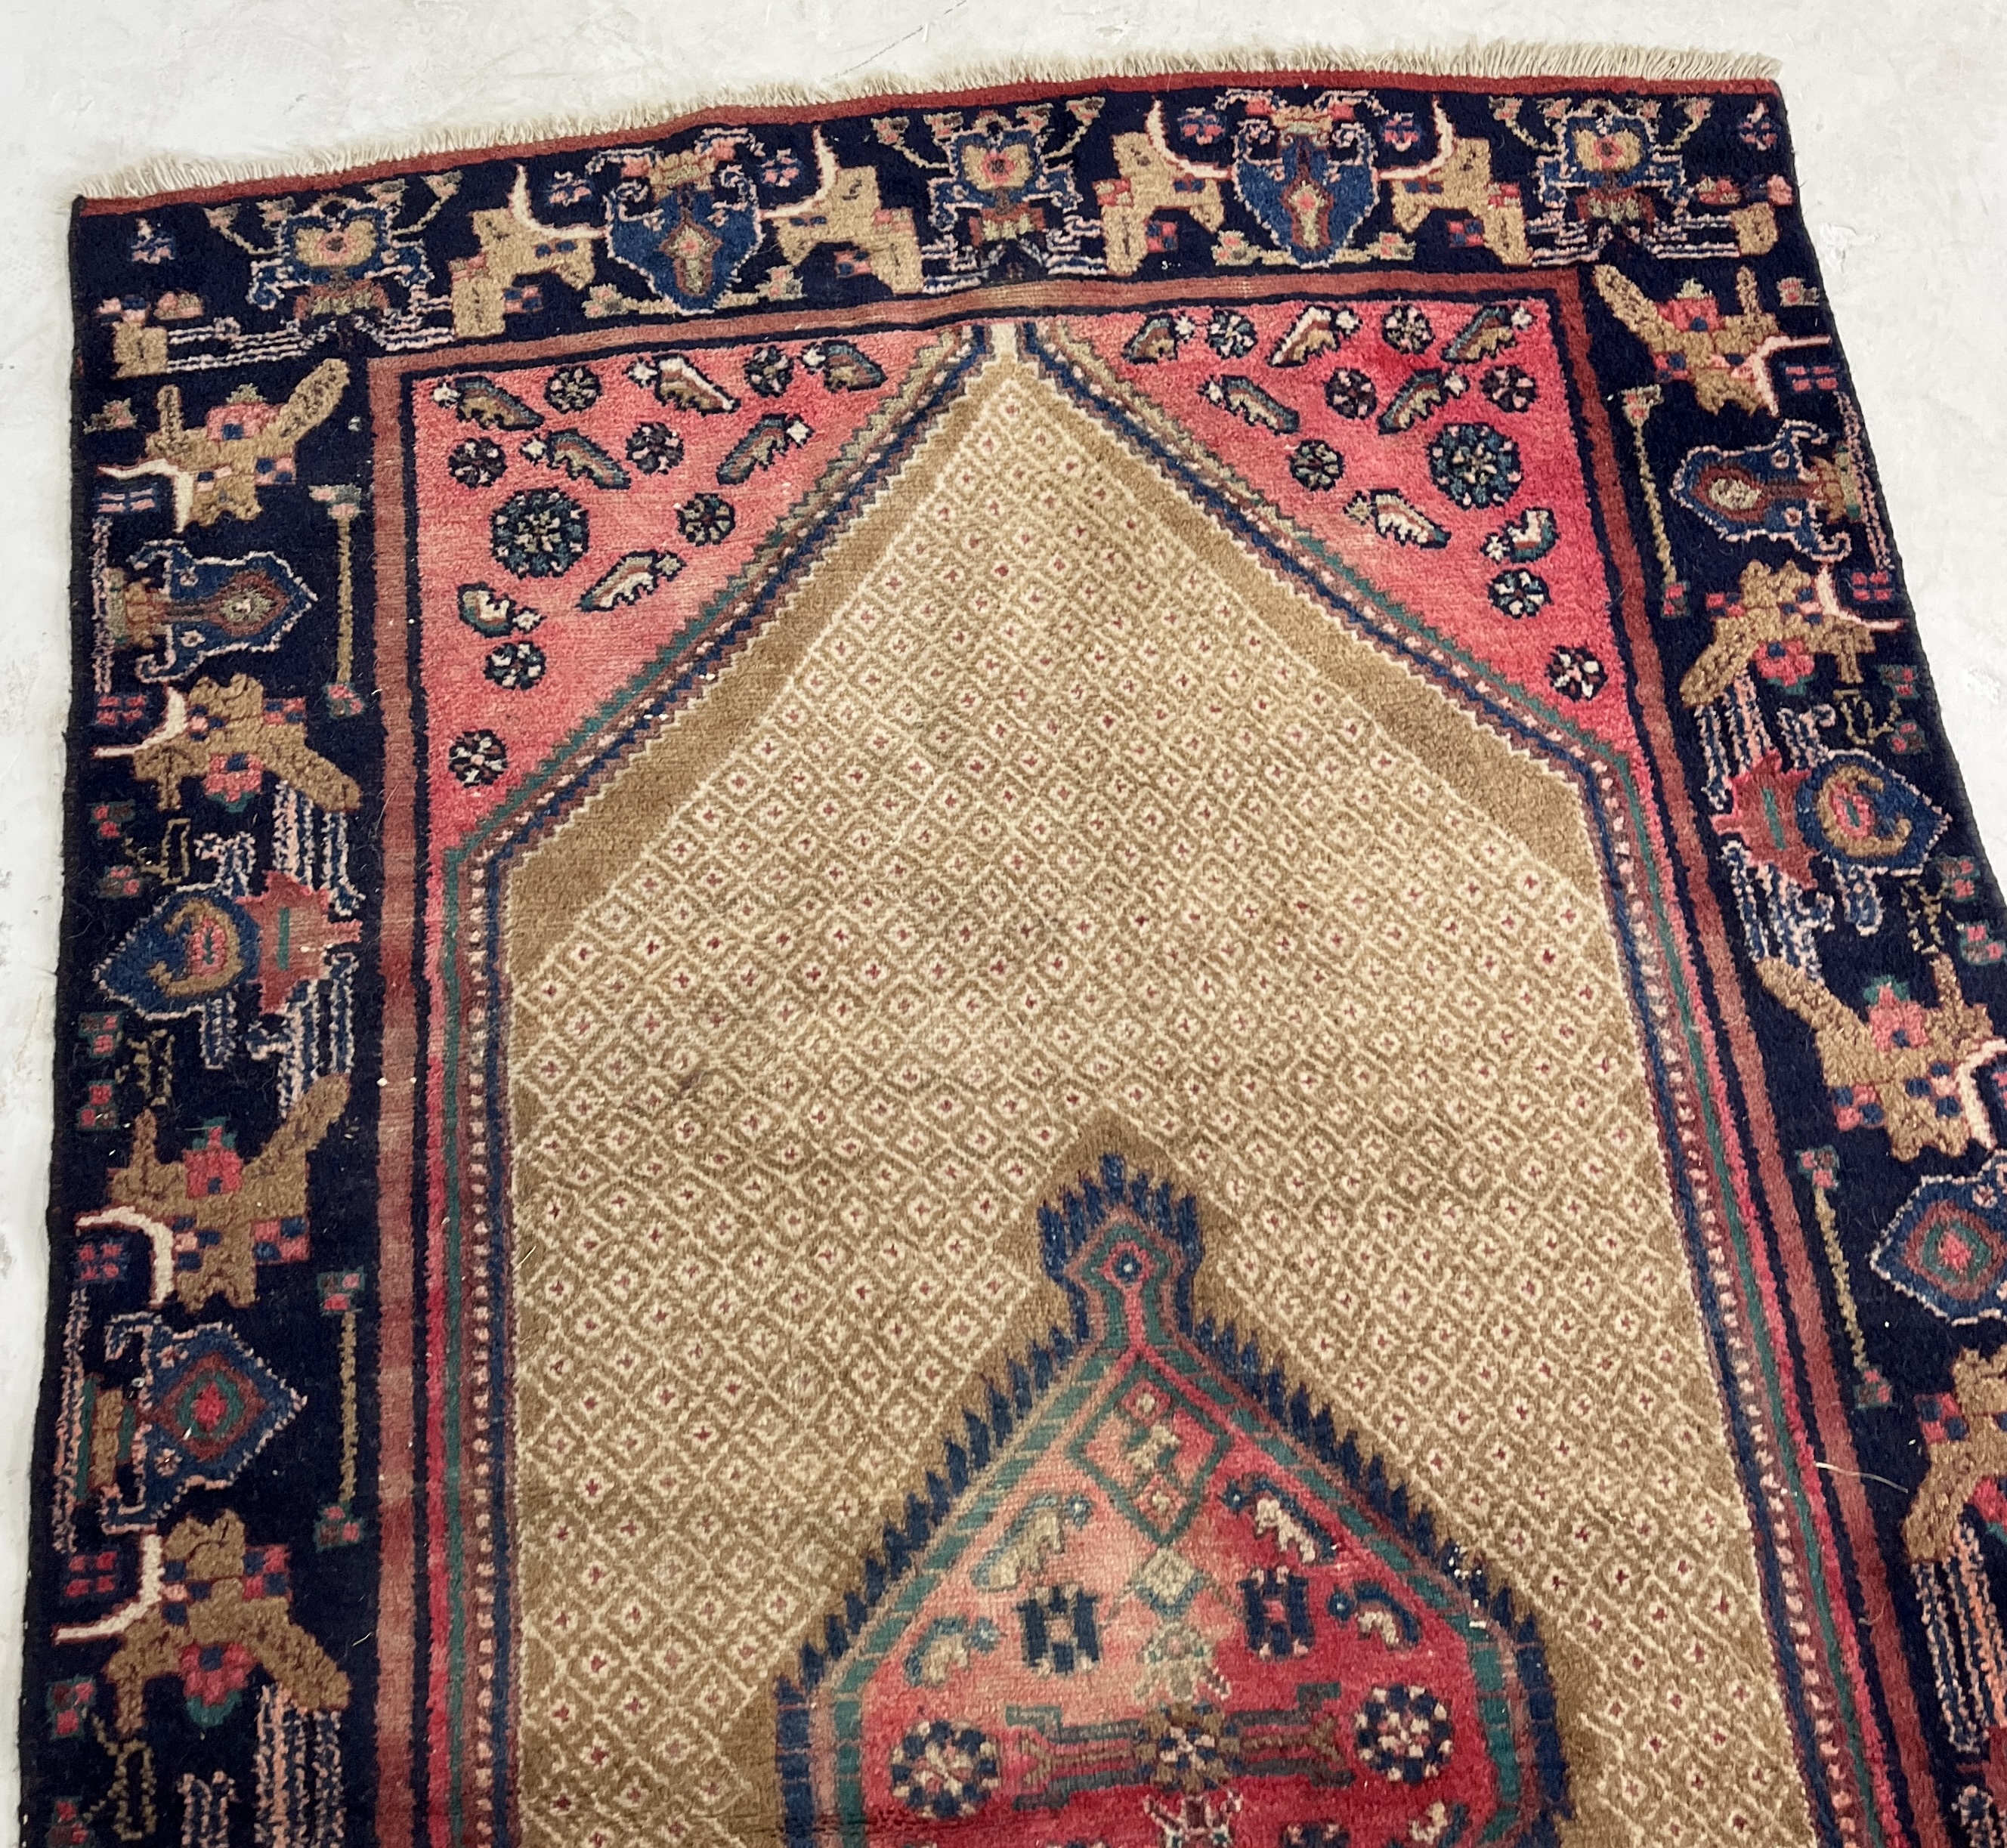 A Eastern red ground rug with central motif - 212cm x 122cm - Image 3 of 4